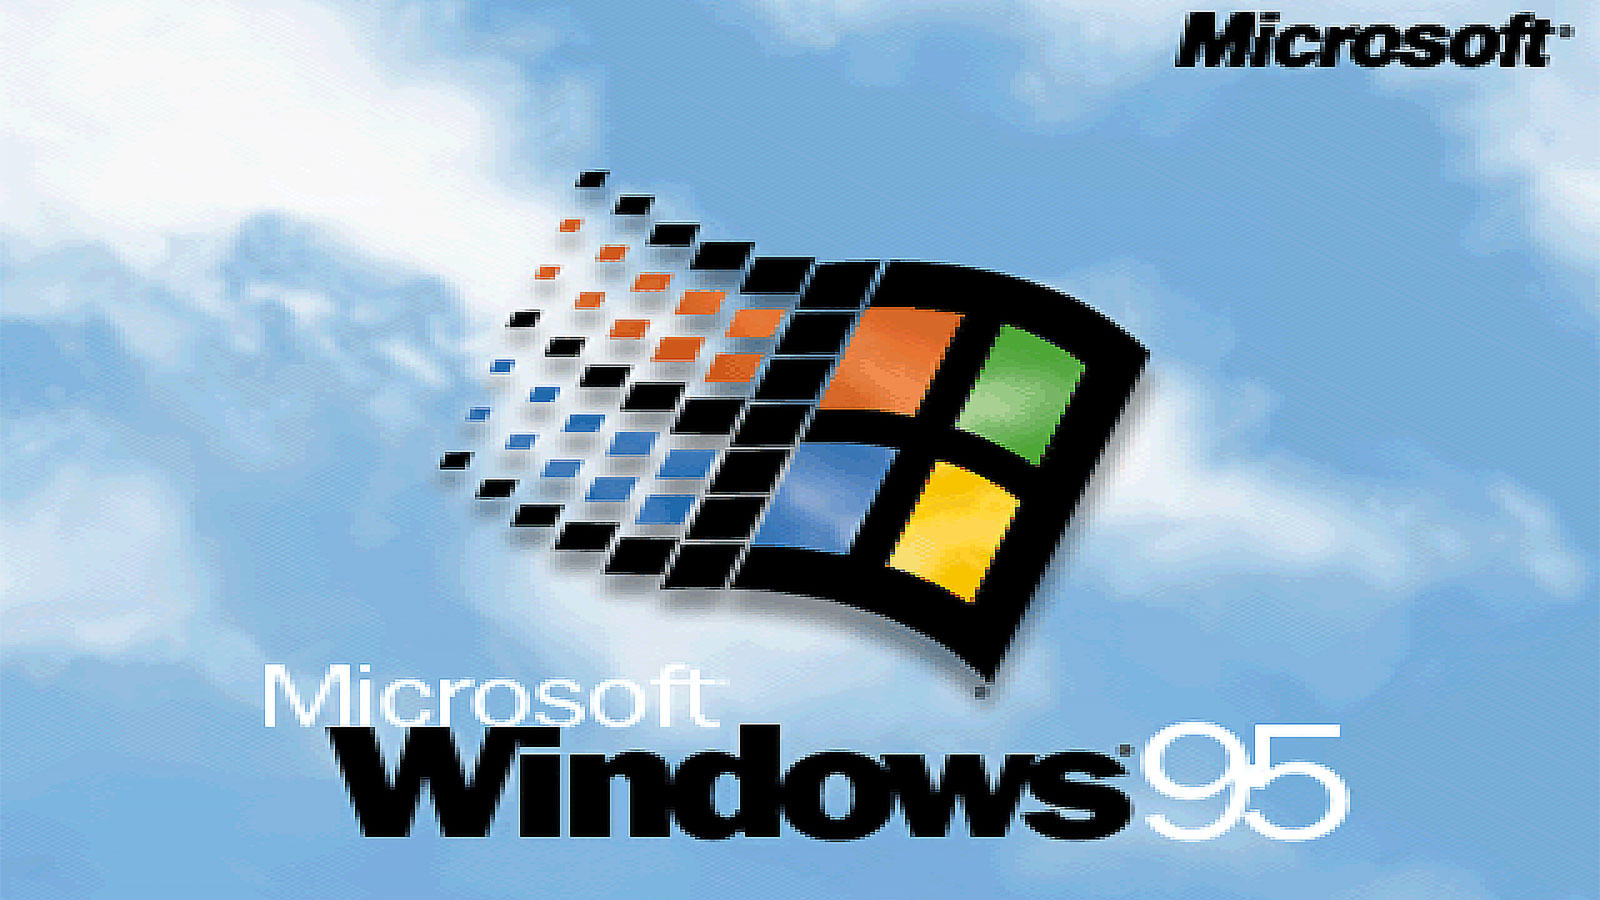 Why The Launch Of Windows 95 Was Such A Huge Deal